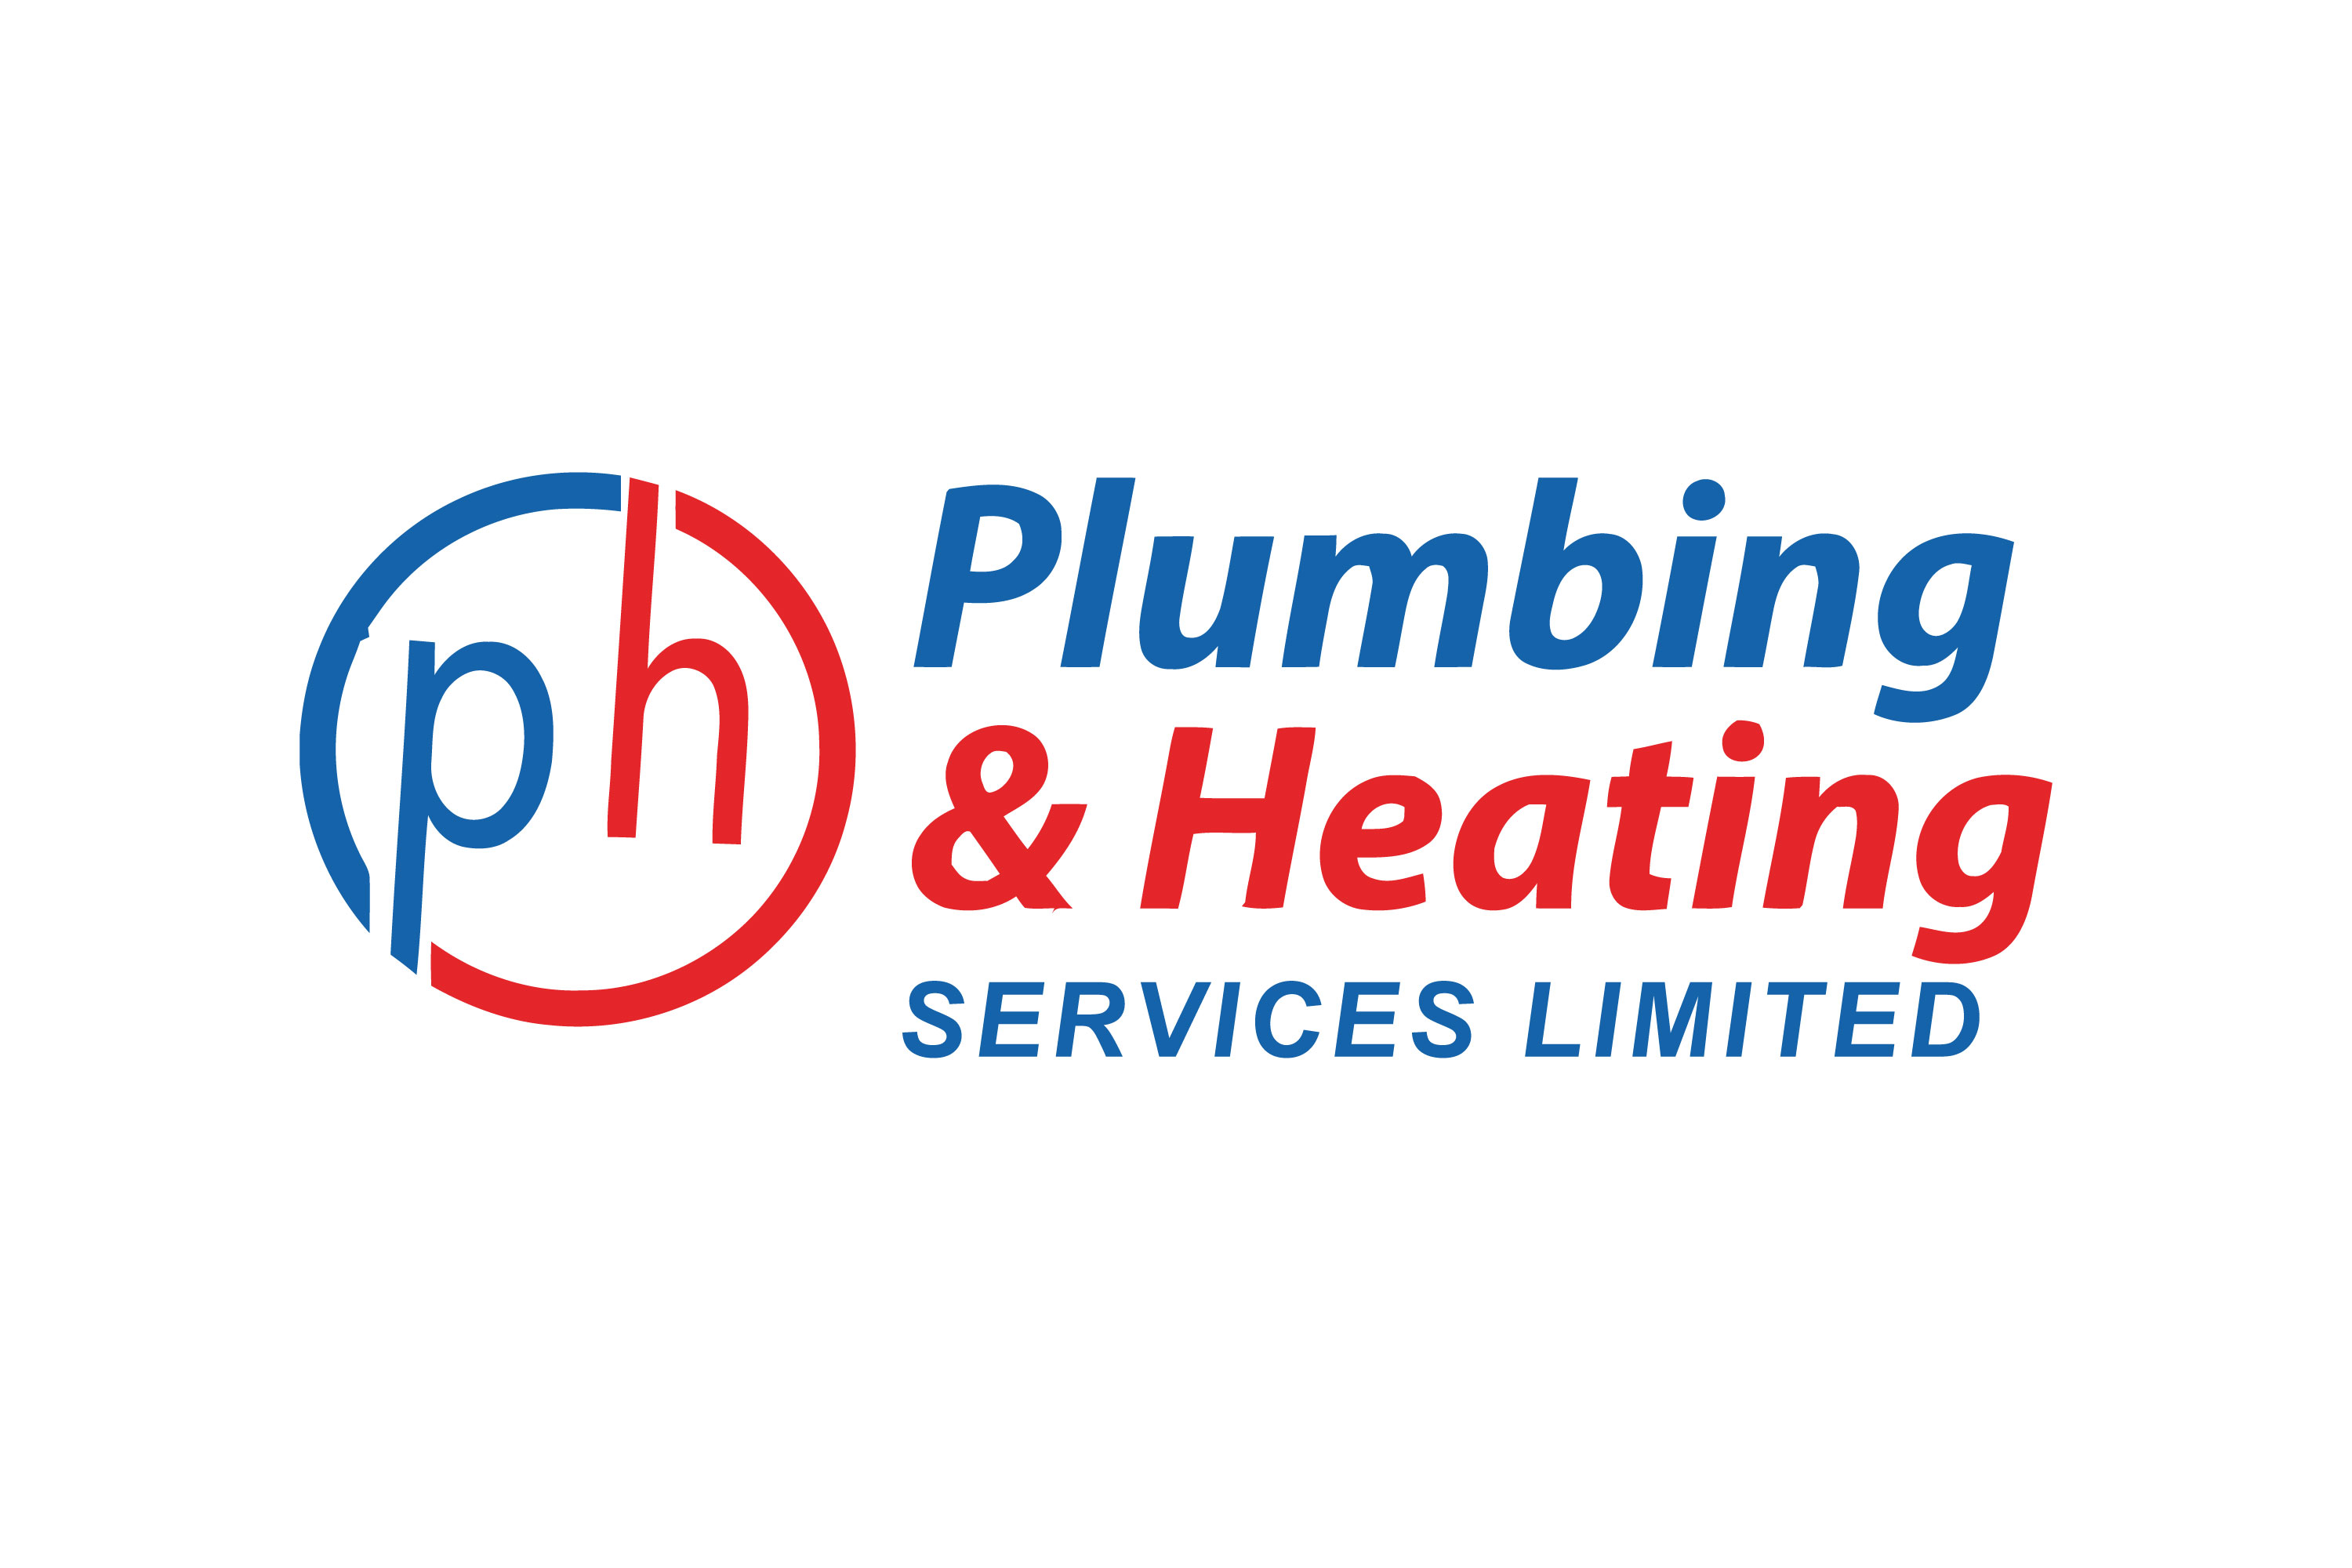 PH Plumbing and Heating Services Ltd